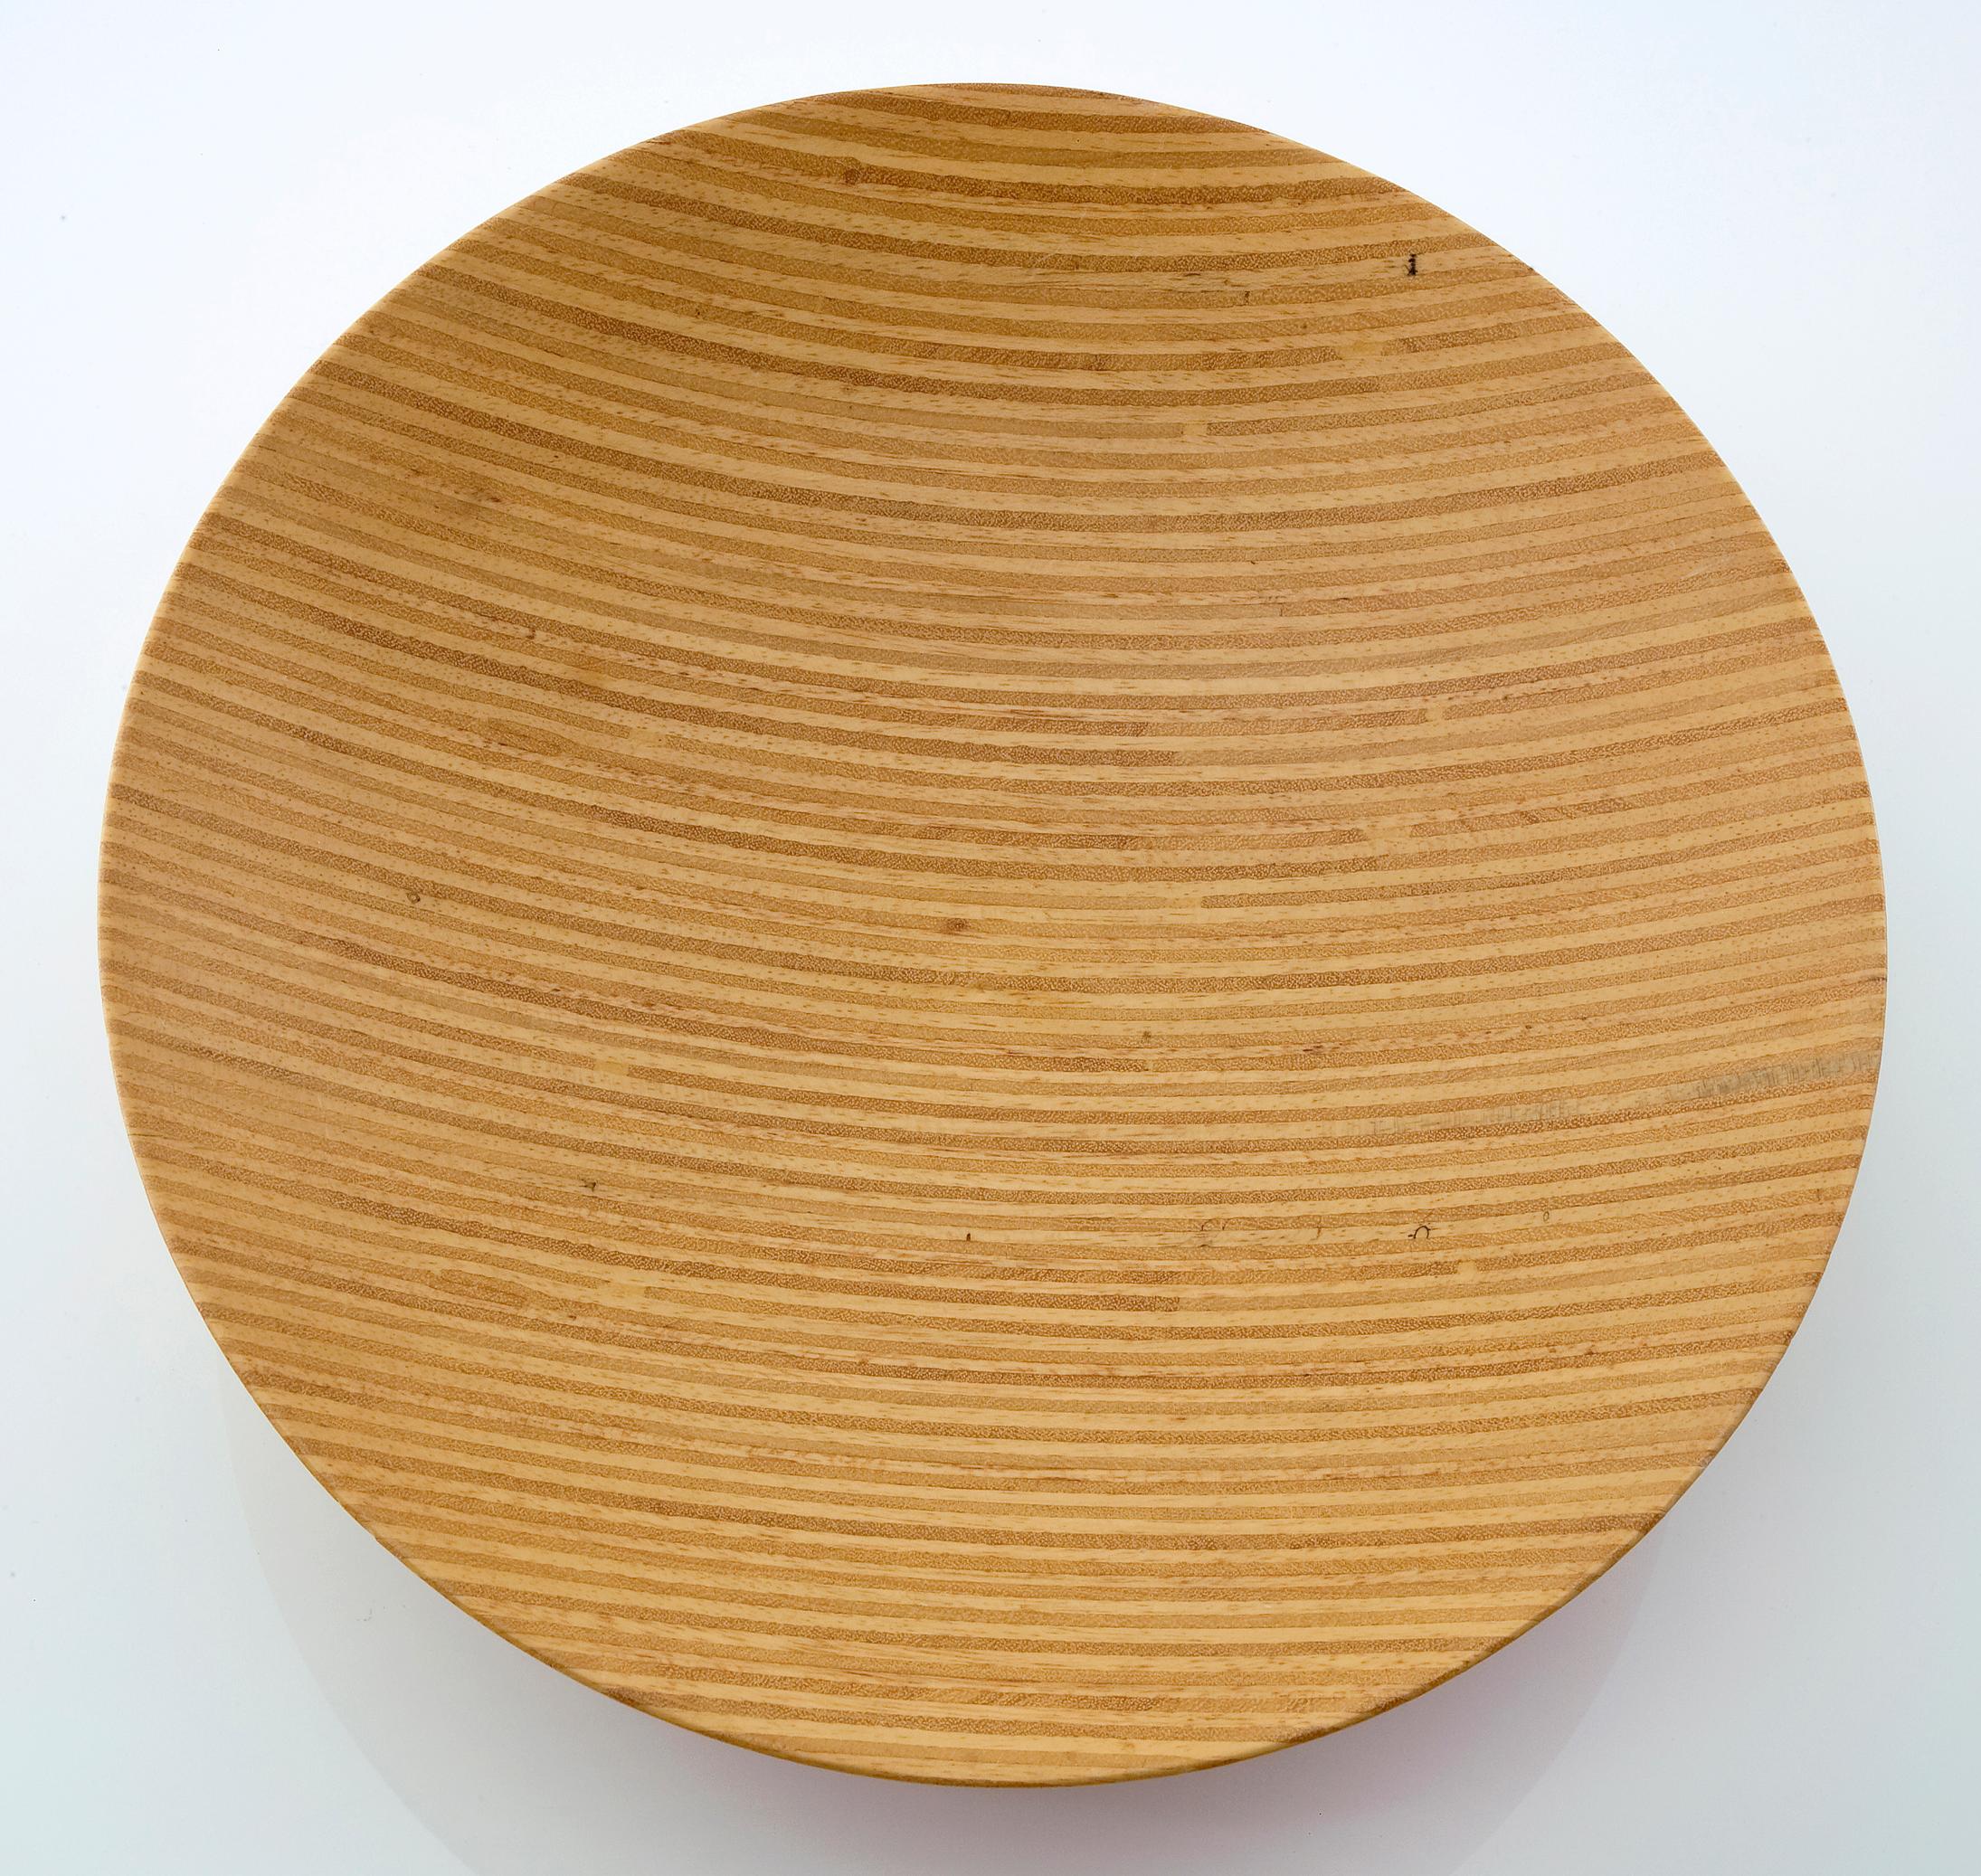 Modern Handcrafted Bowl in Hardwood by Julia Krantz and Sao Paulo, 2007